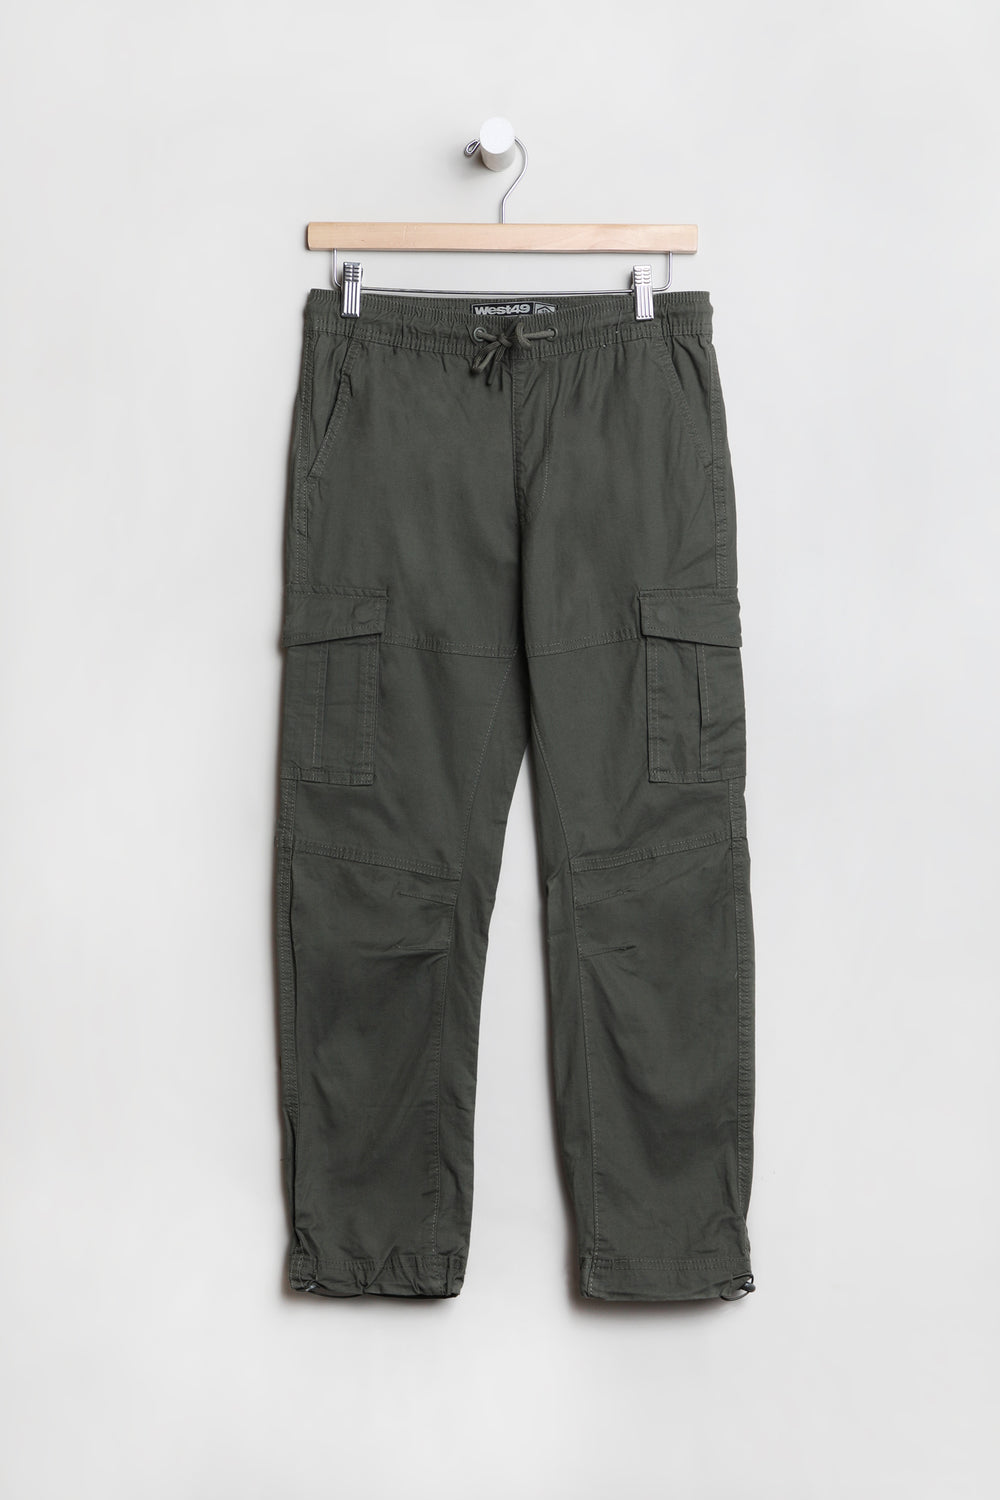 West49 Youth Ripstop Bungee Cargo Jogger West49 Youth Ripstop Bungee Cargo Jogger